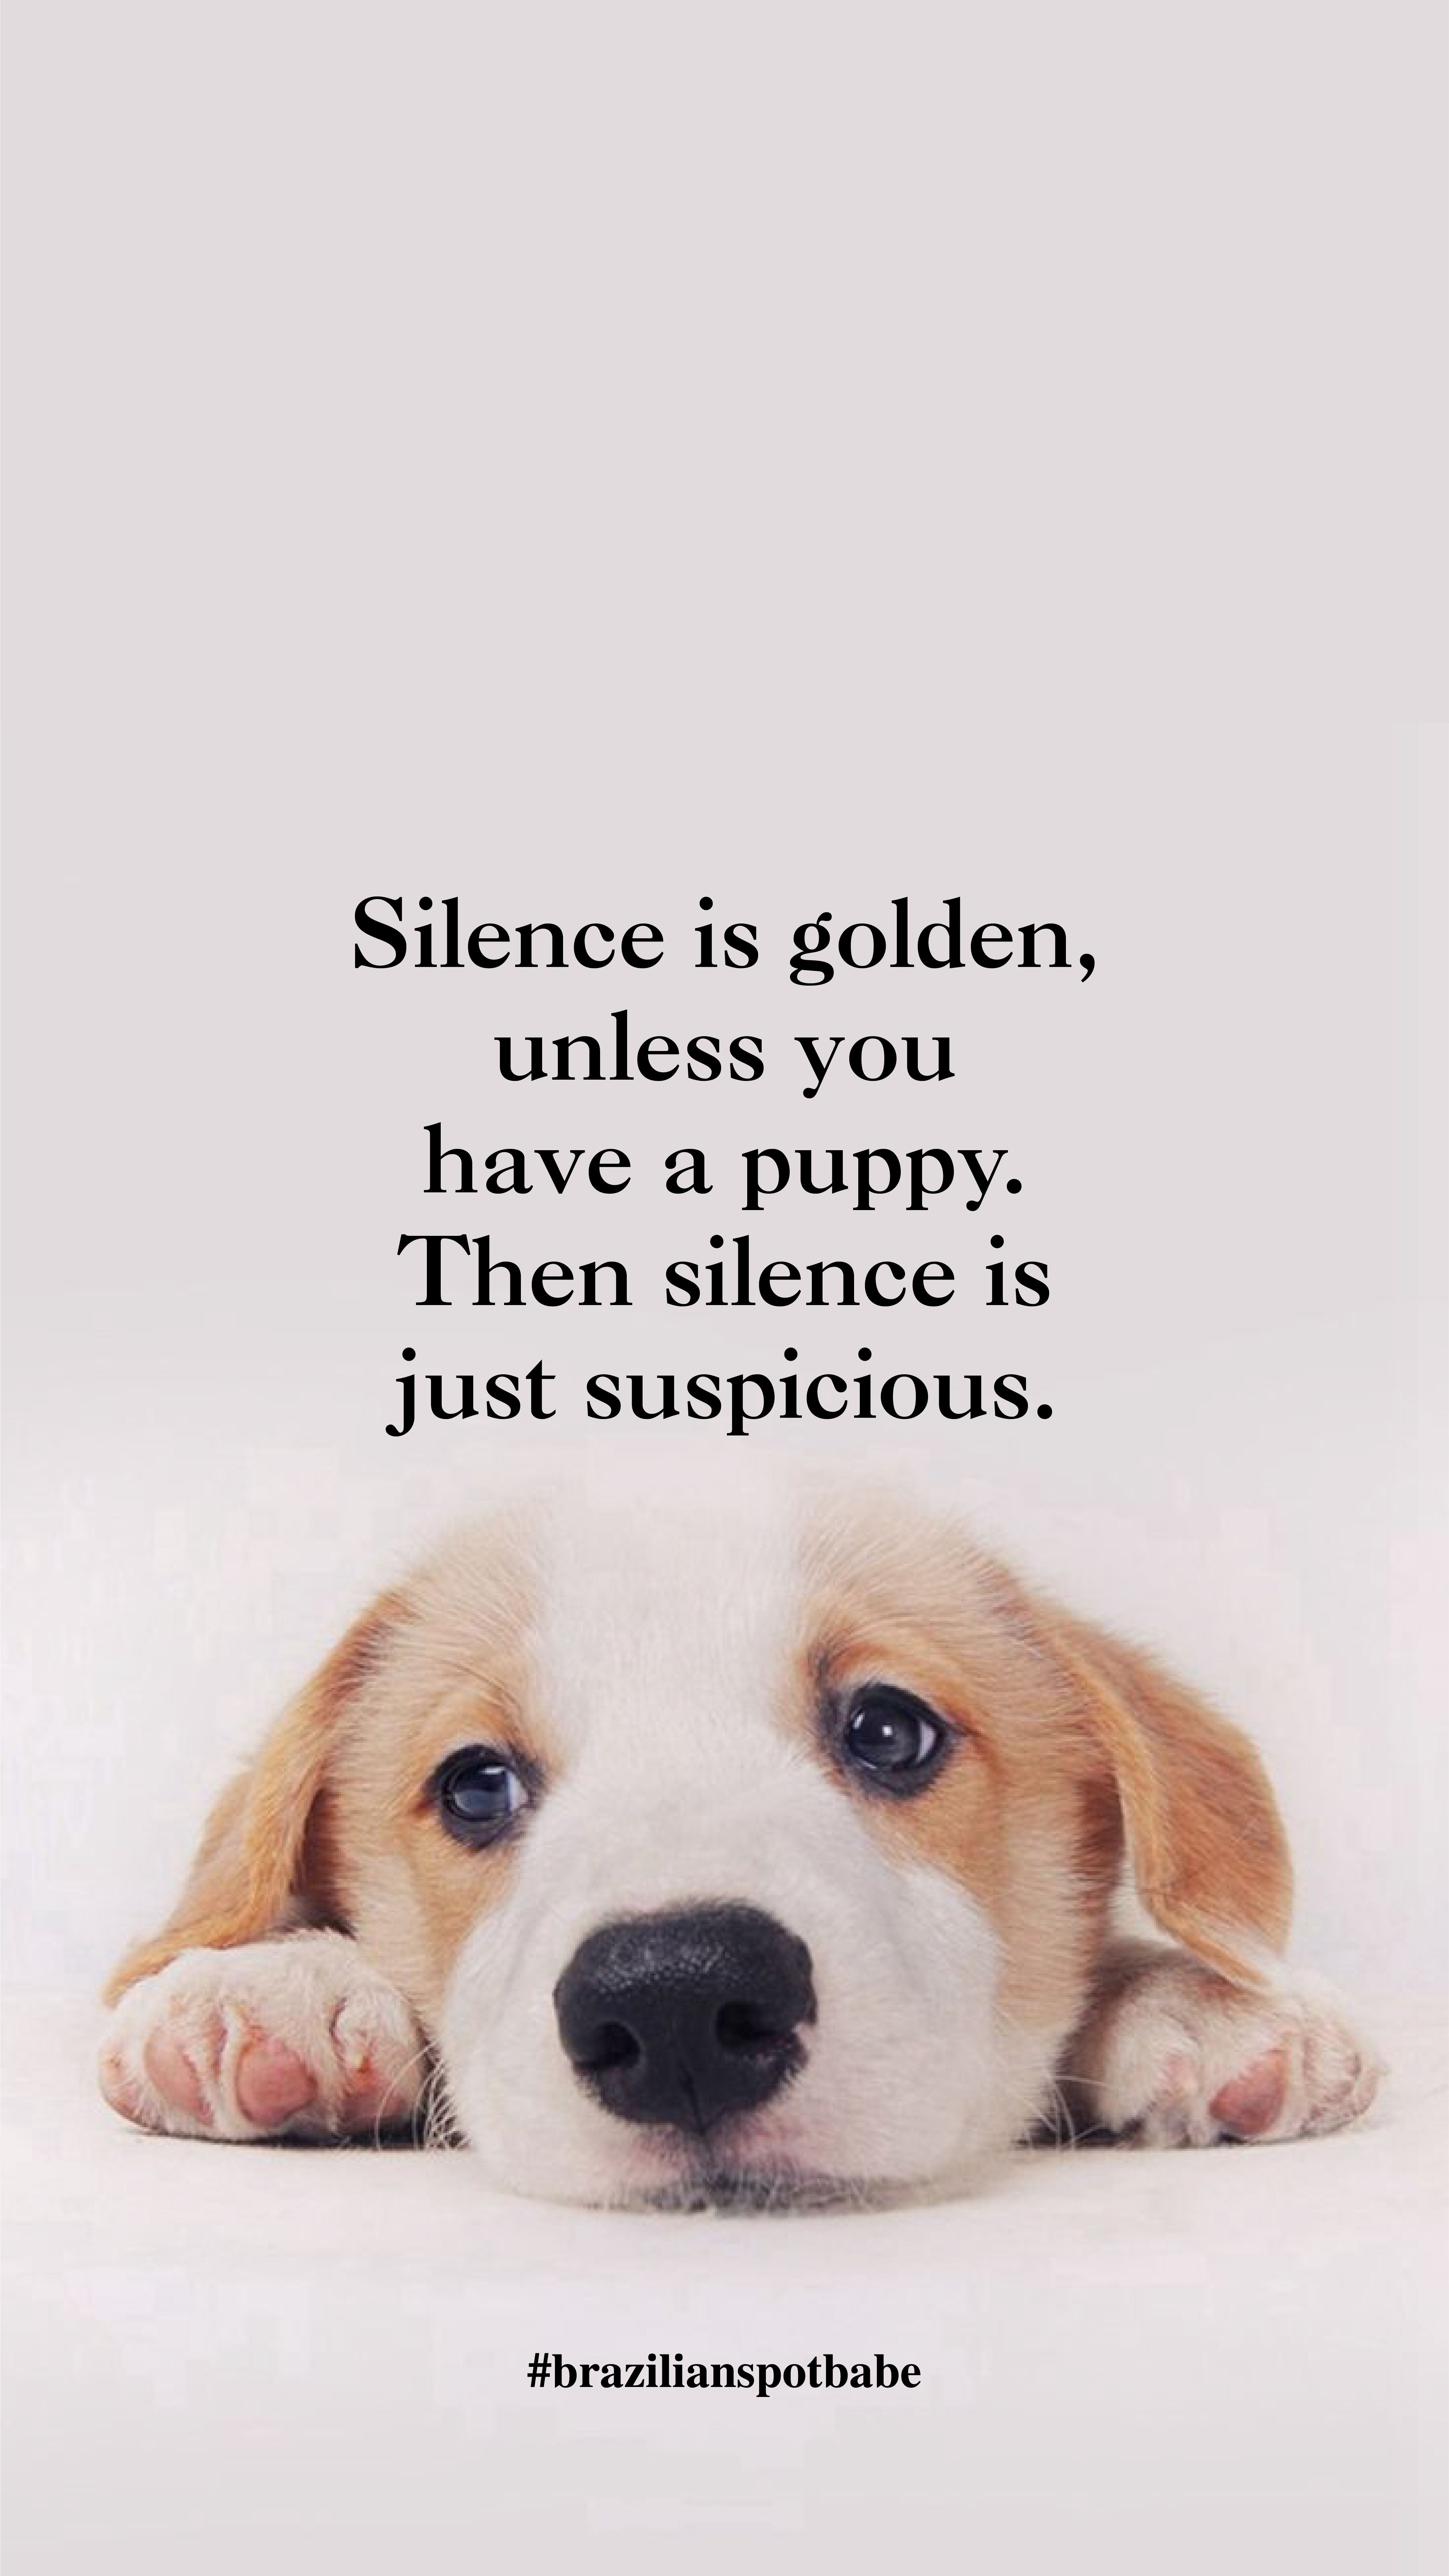 Dog Quotes Wallpapers - Wallpaper Cave